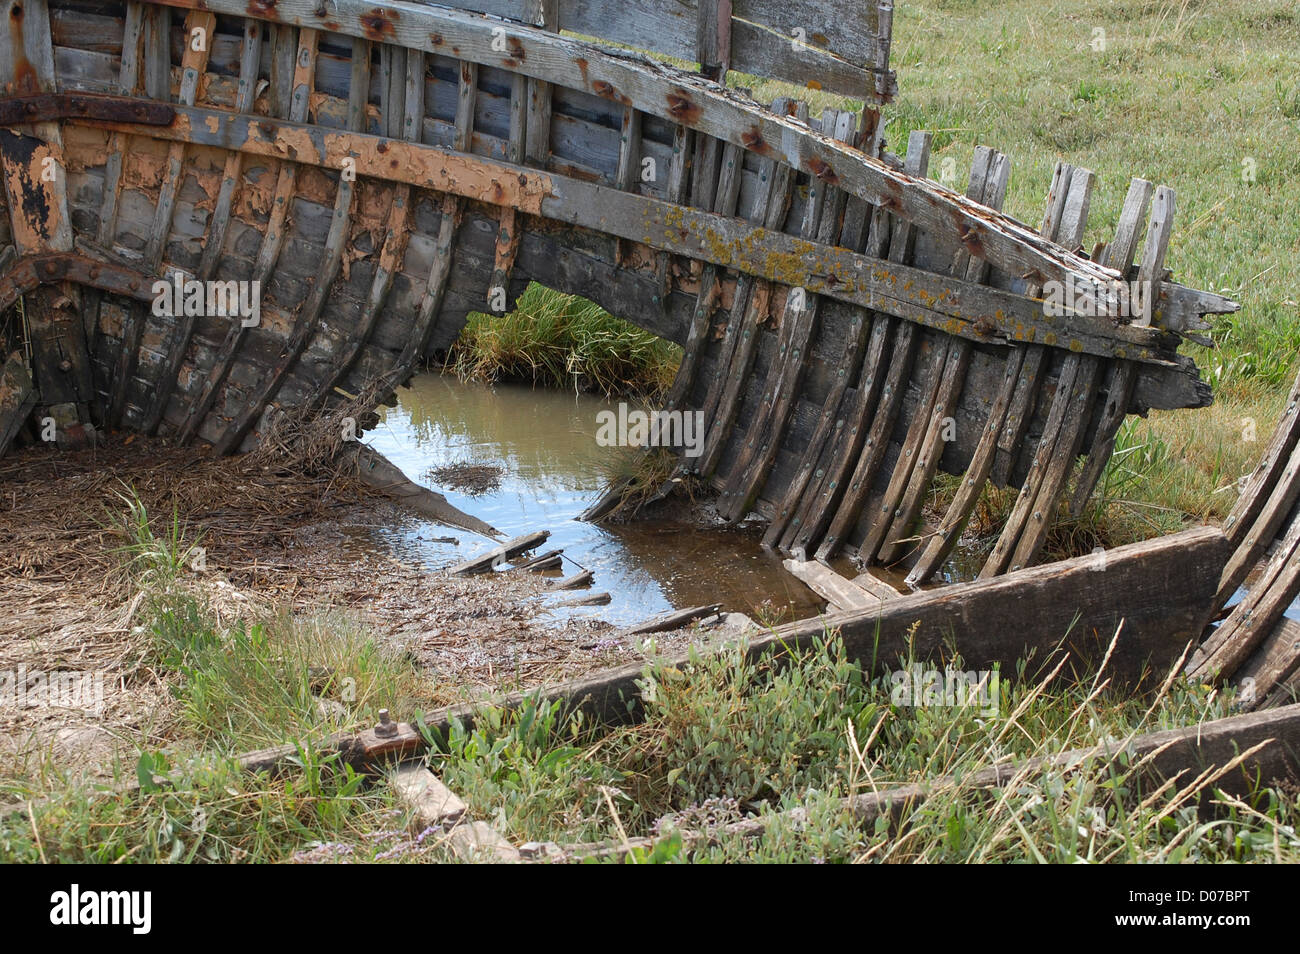 Remains of a wrecked wooden boat, Blakeney, Norfolk, UK Stock Photo